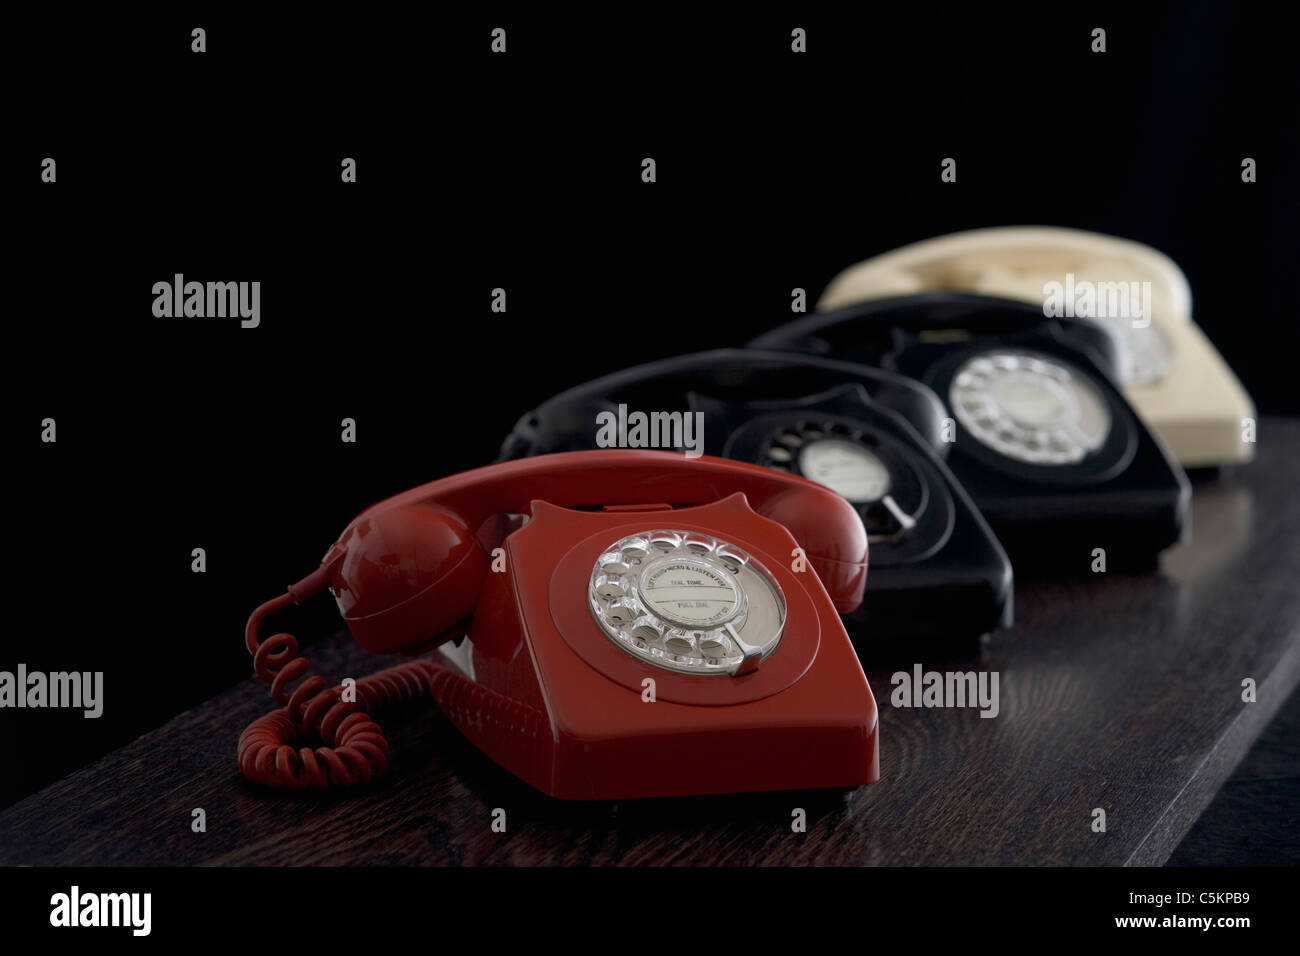 A row of old-fashioned dial telephones on a desk, a red one in the foreground Stock Photo